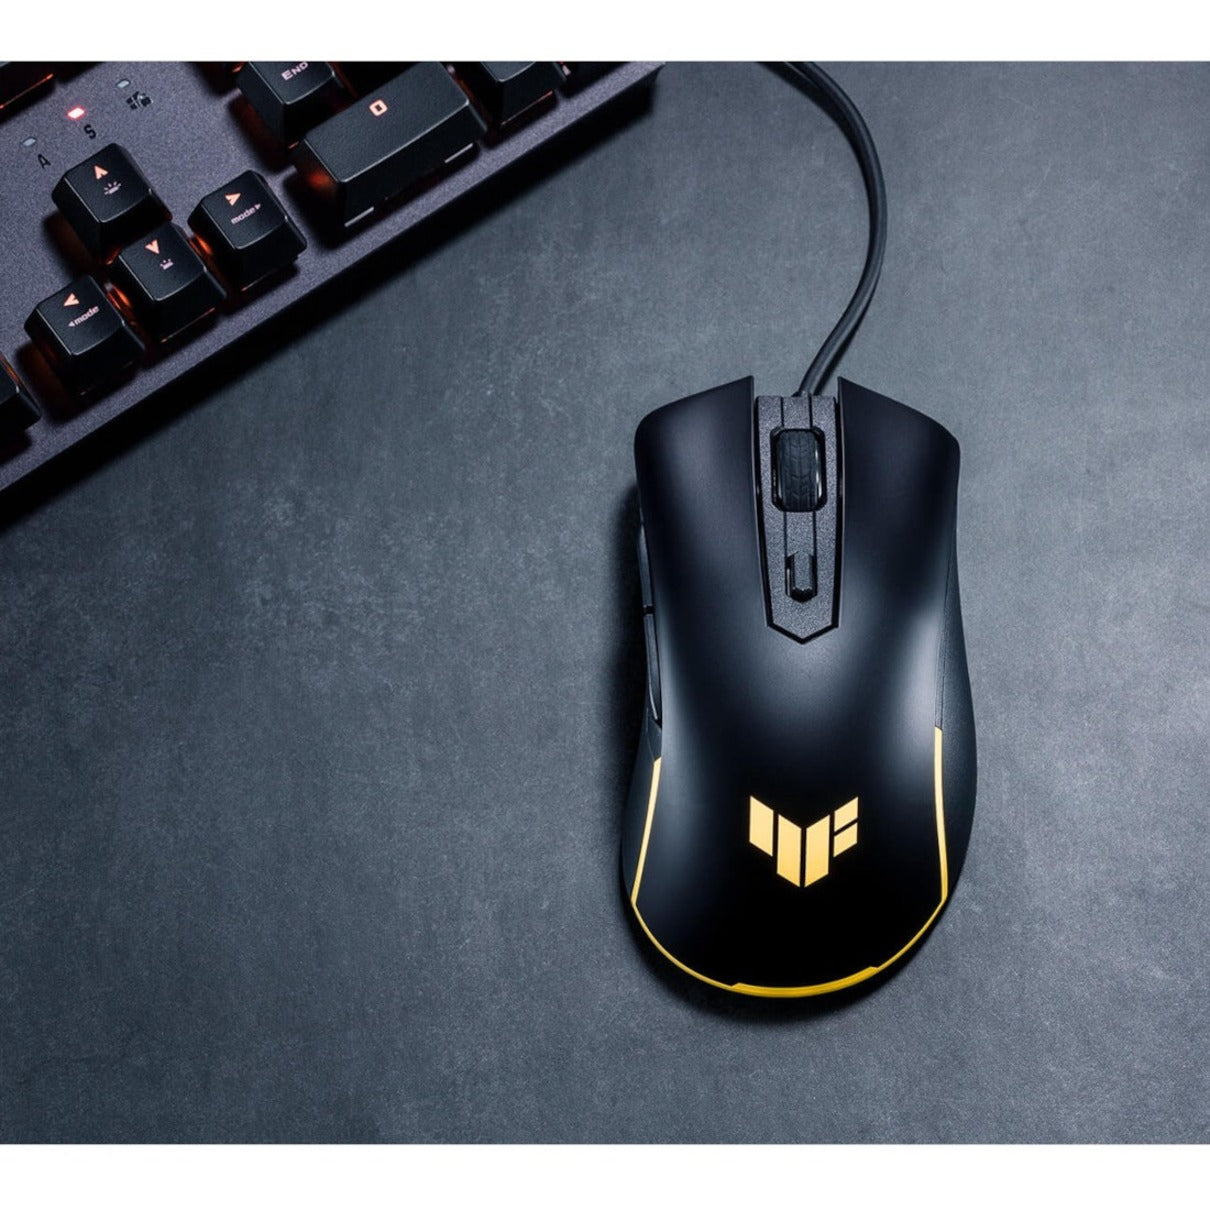 TUF P309 TUF GAMING M3 GEN II Gaming Mouse, Ergonomic Fit, 8000 DPI, 6 Programmable Buttons